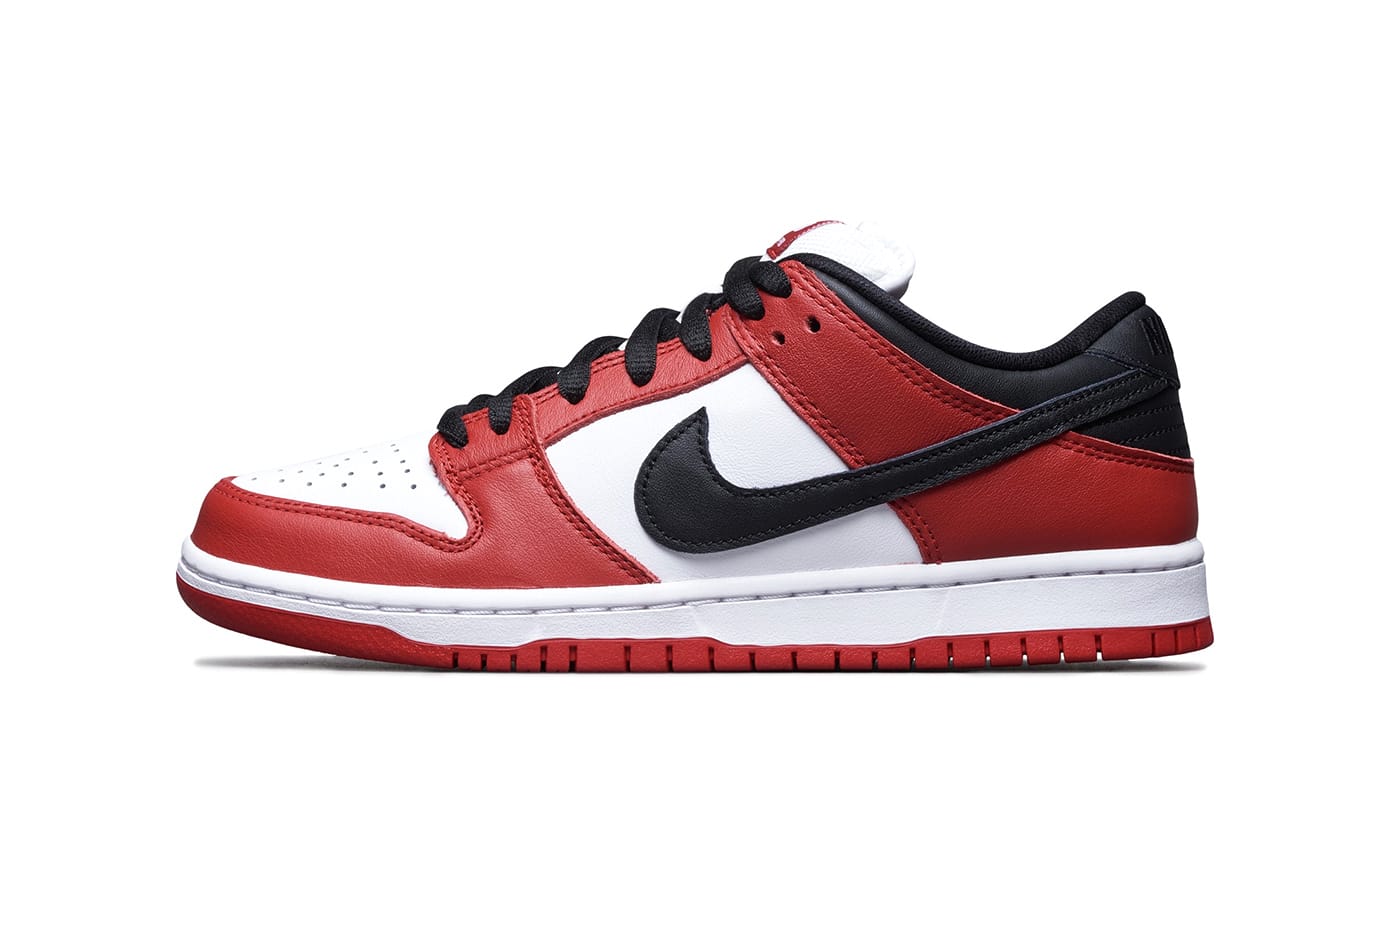 Nike SB Dunk Low J-Pack “Chicago” Release | HYPEBEAST